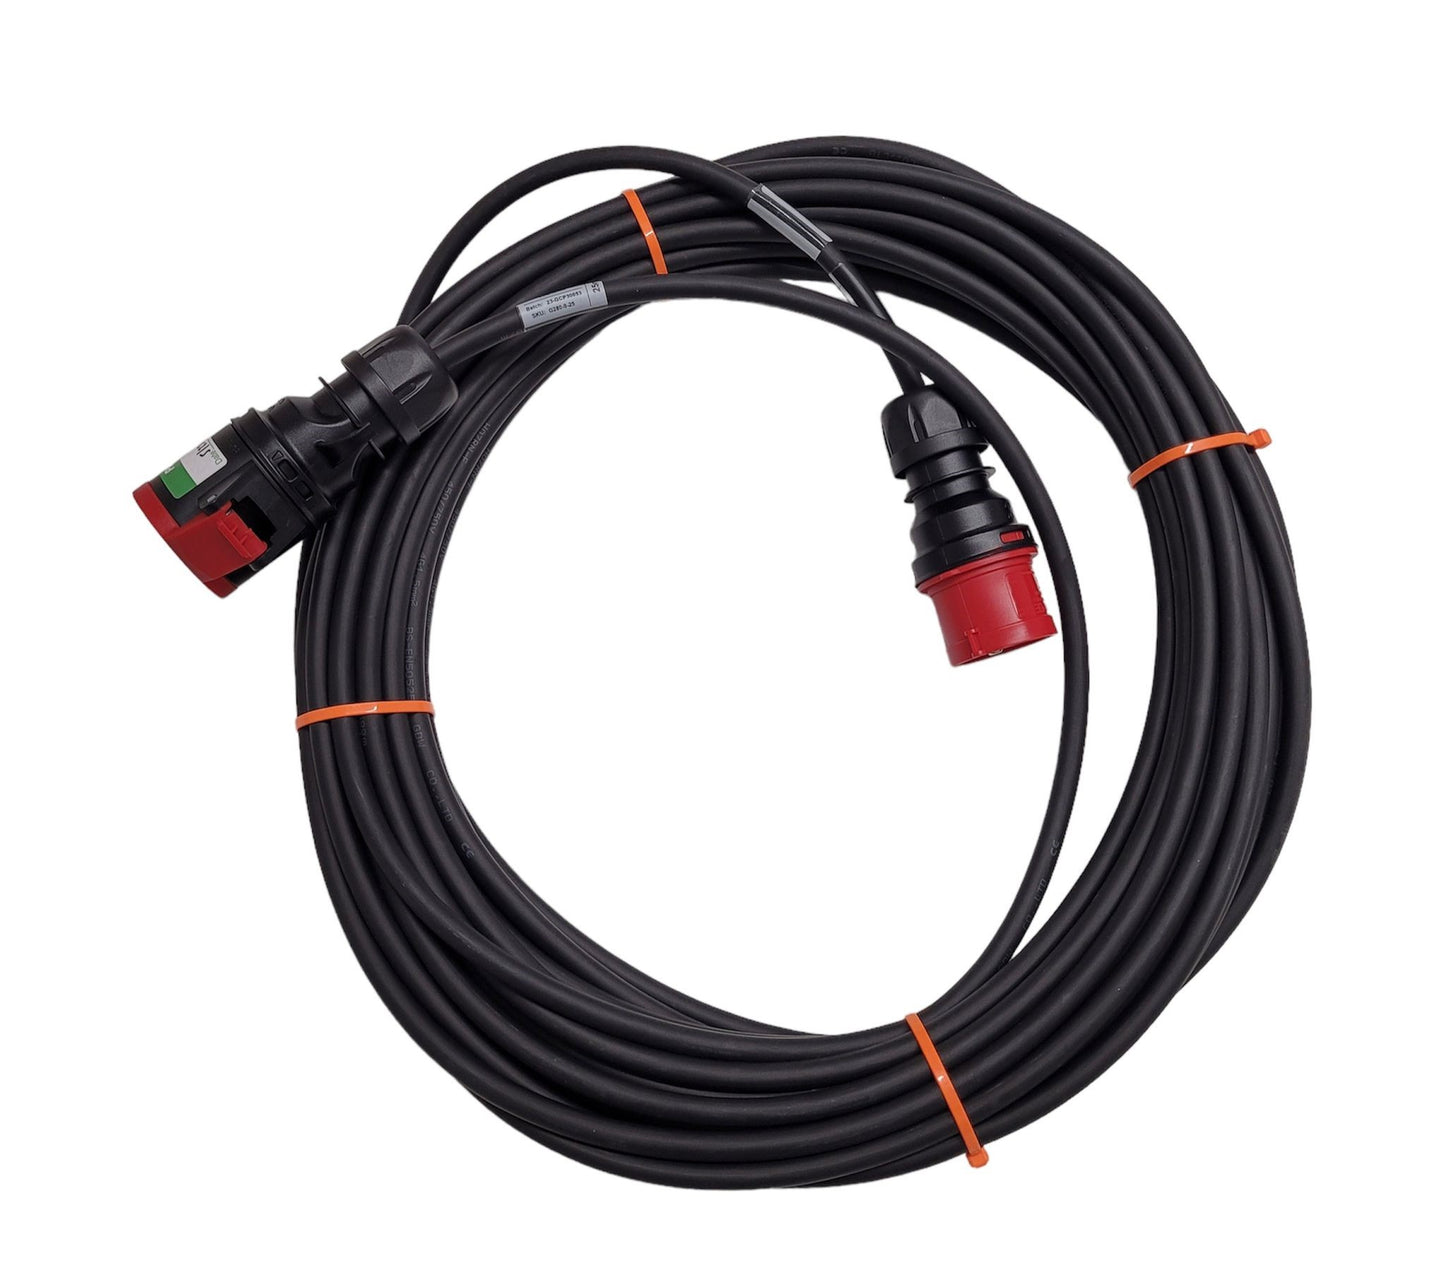 4 Pin CEE Power - Direct Control Cable Extension for use with Electric Chain Hoists in Event Technology